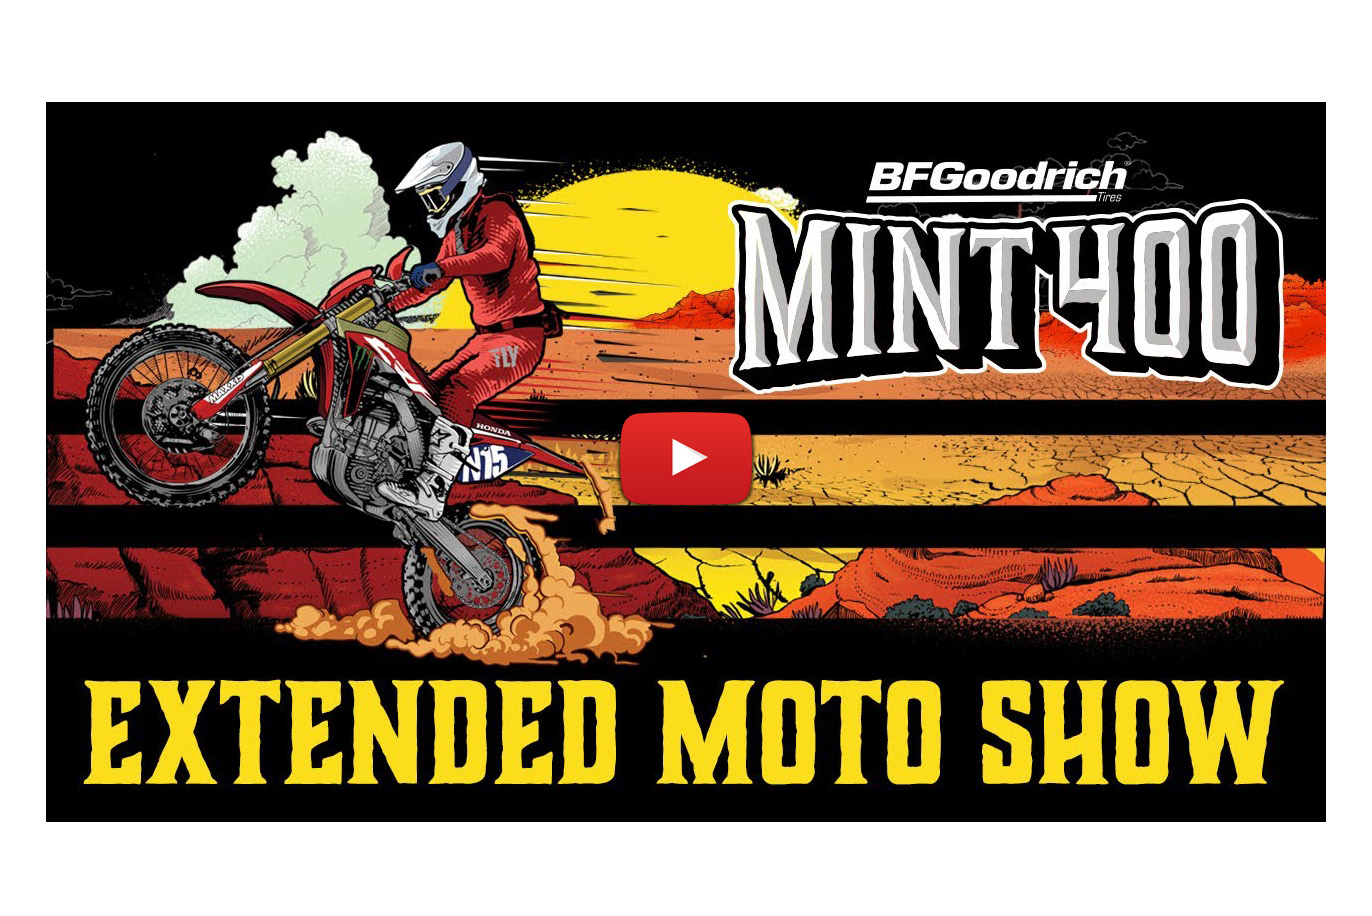 The Mint 400: highlights from the 2020 motorcycle desert race